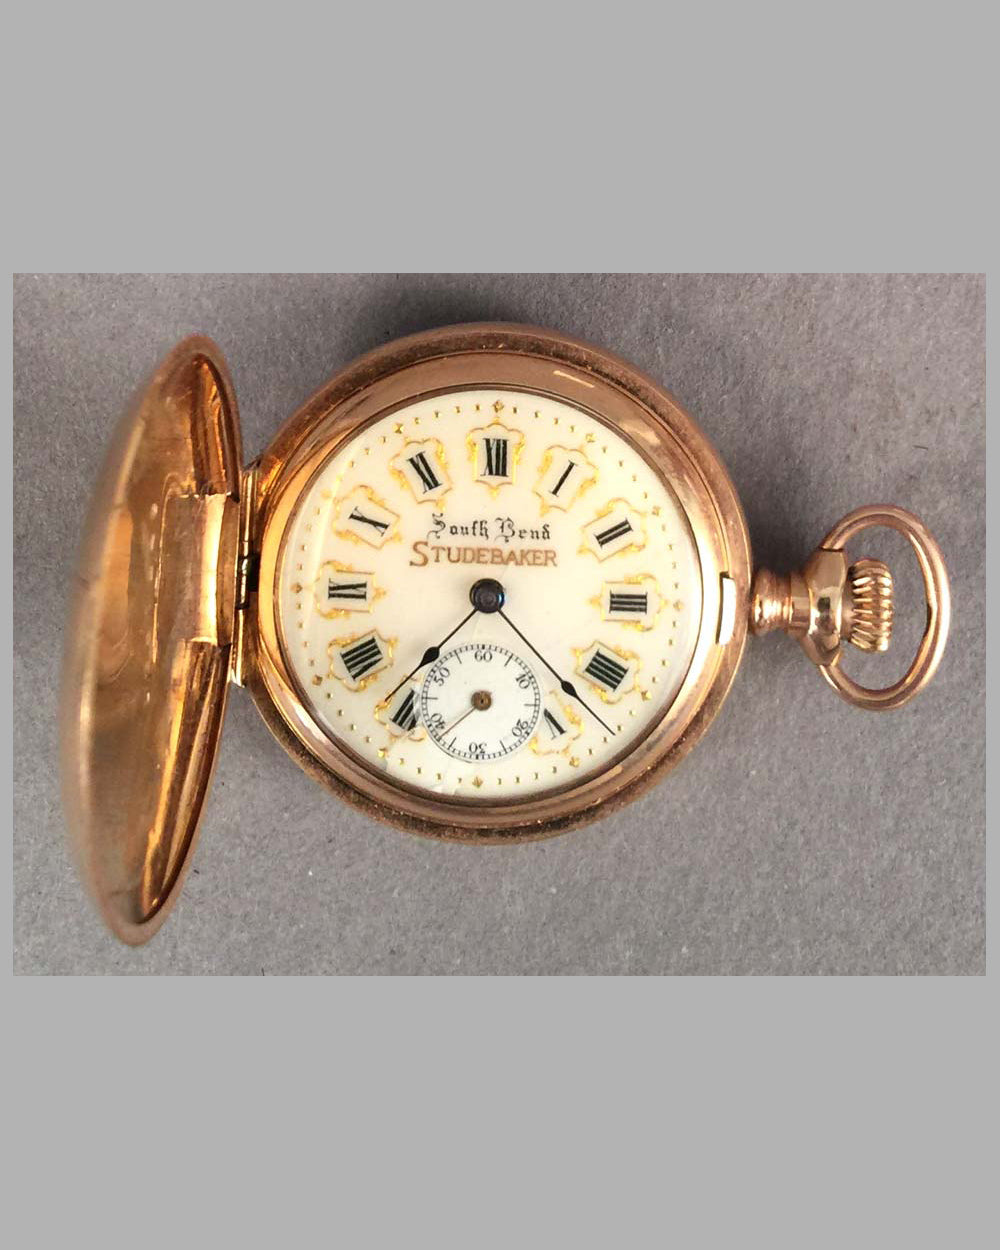 Studebaker womans pocket watch by South Bend